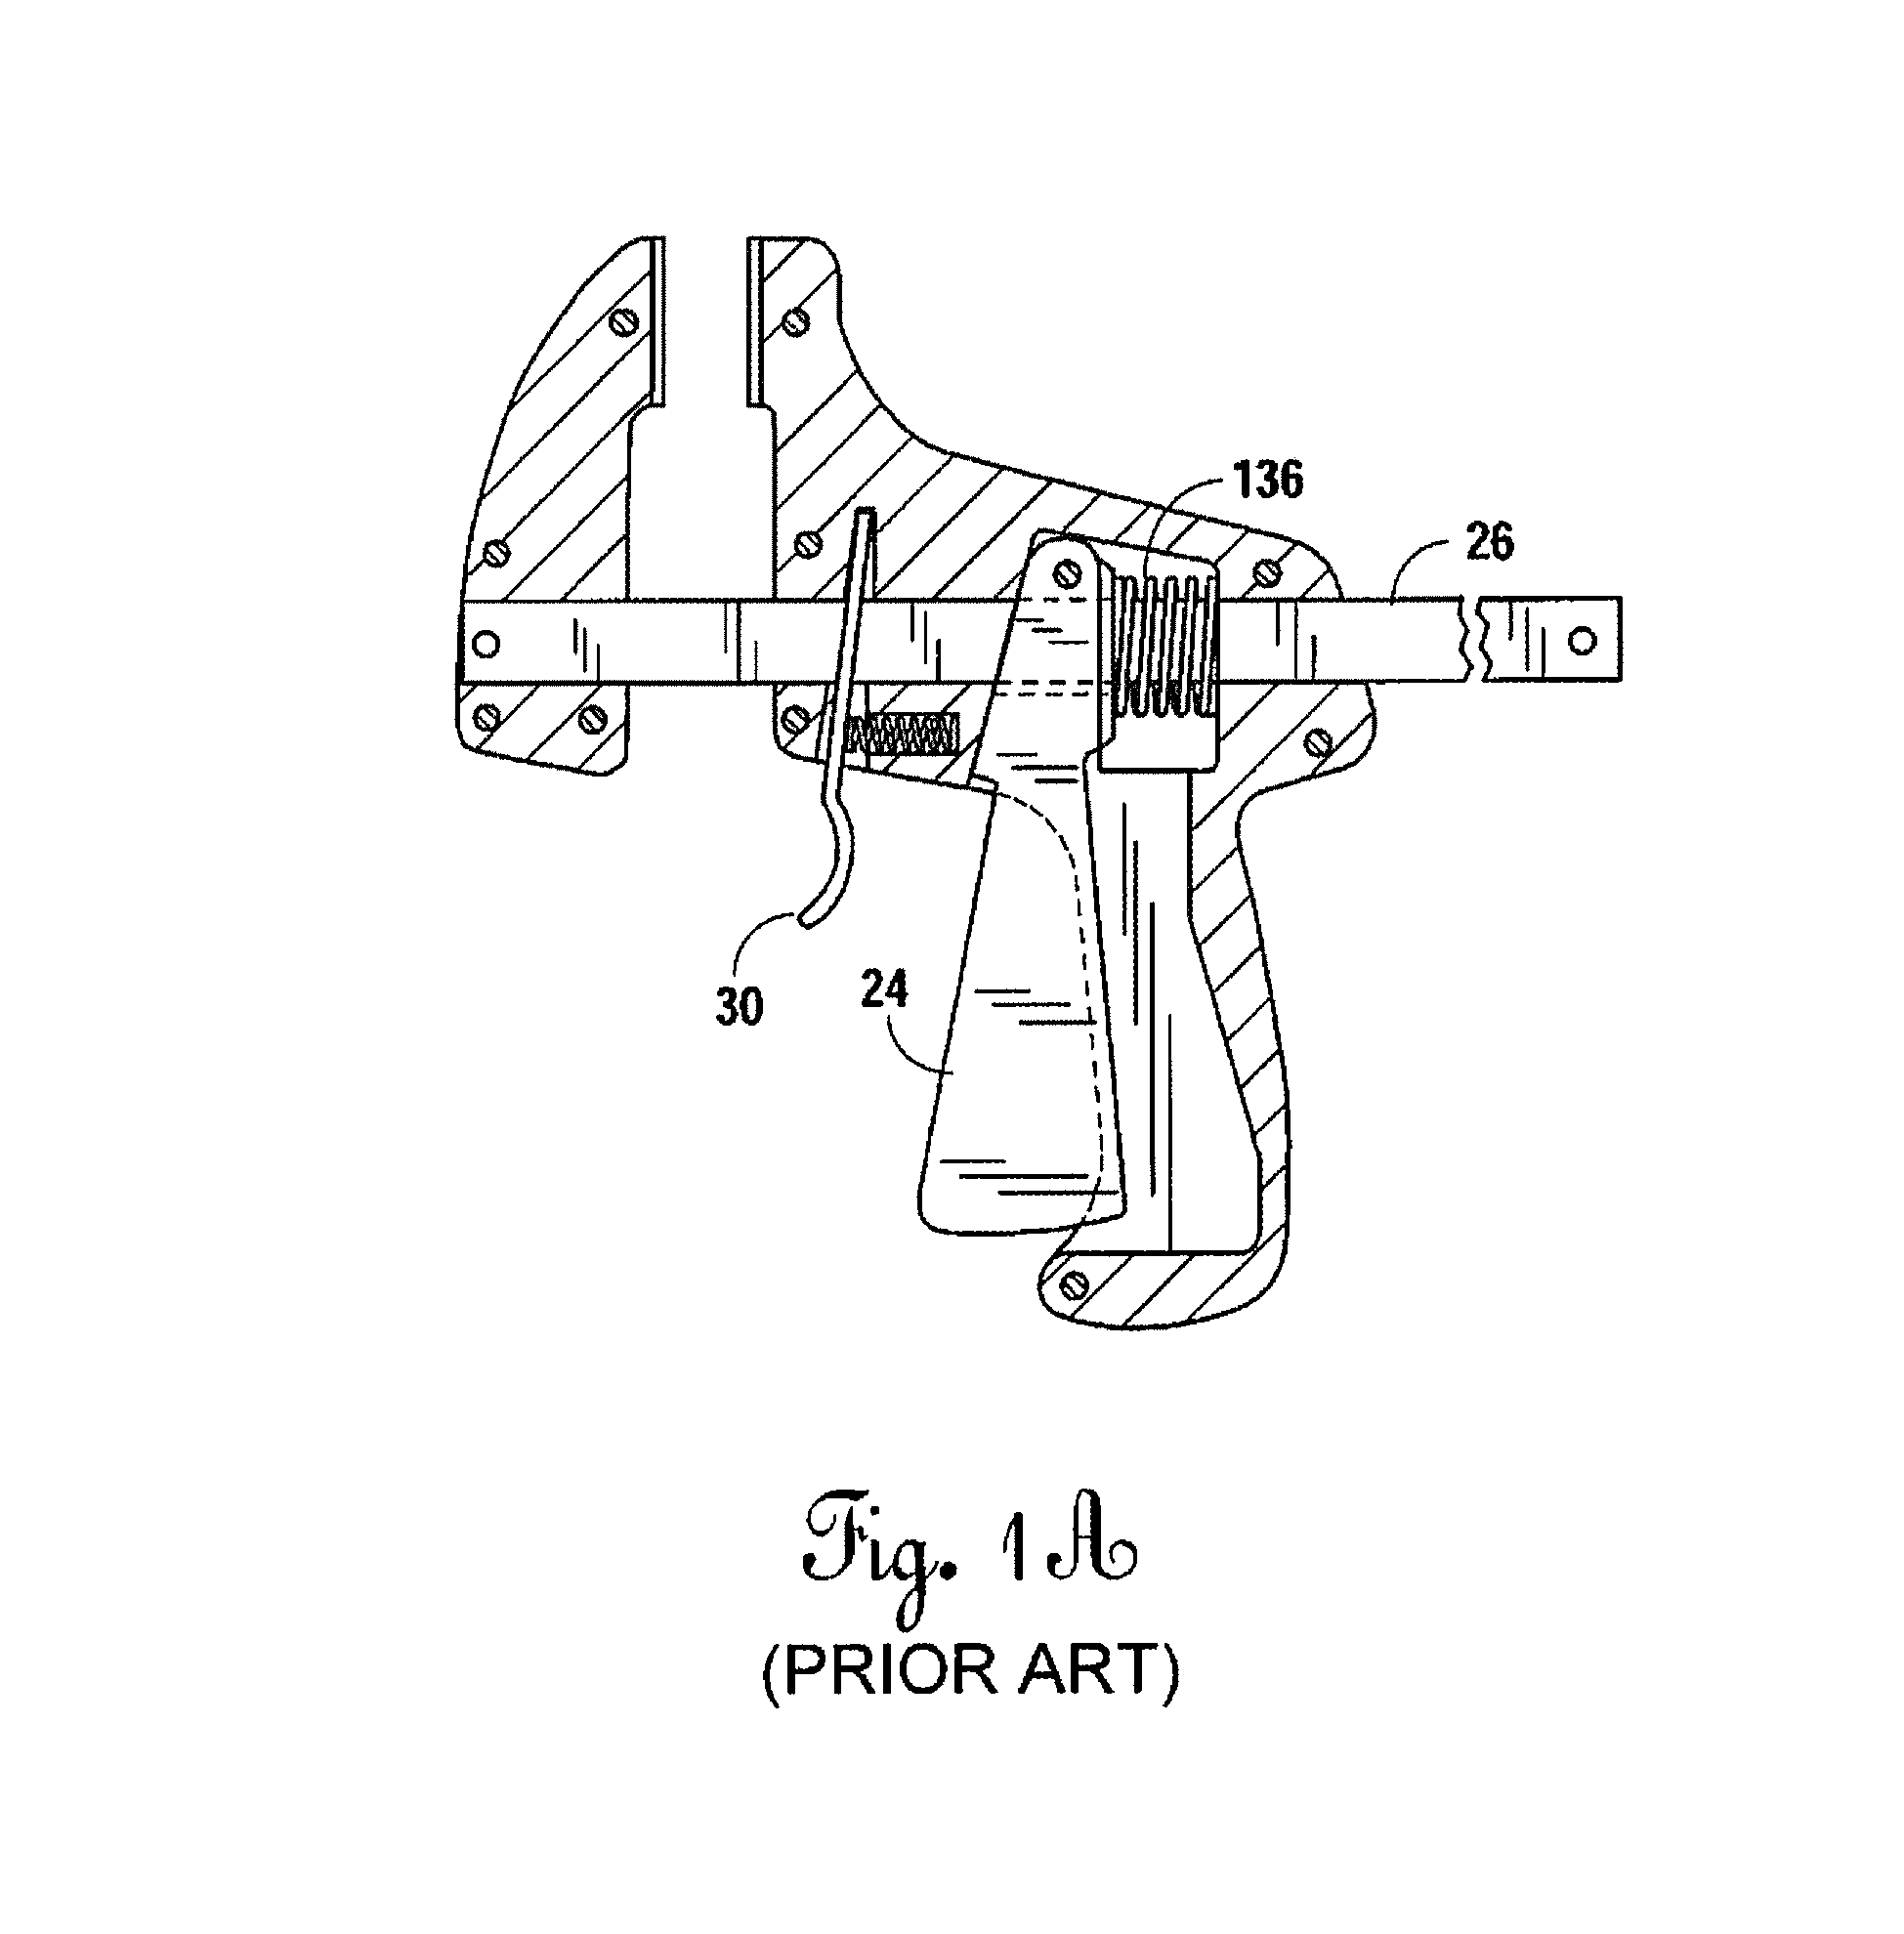 Ladder safety device having a building clamp assembly and a ladder hook assembly